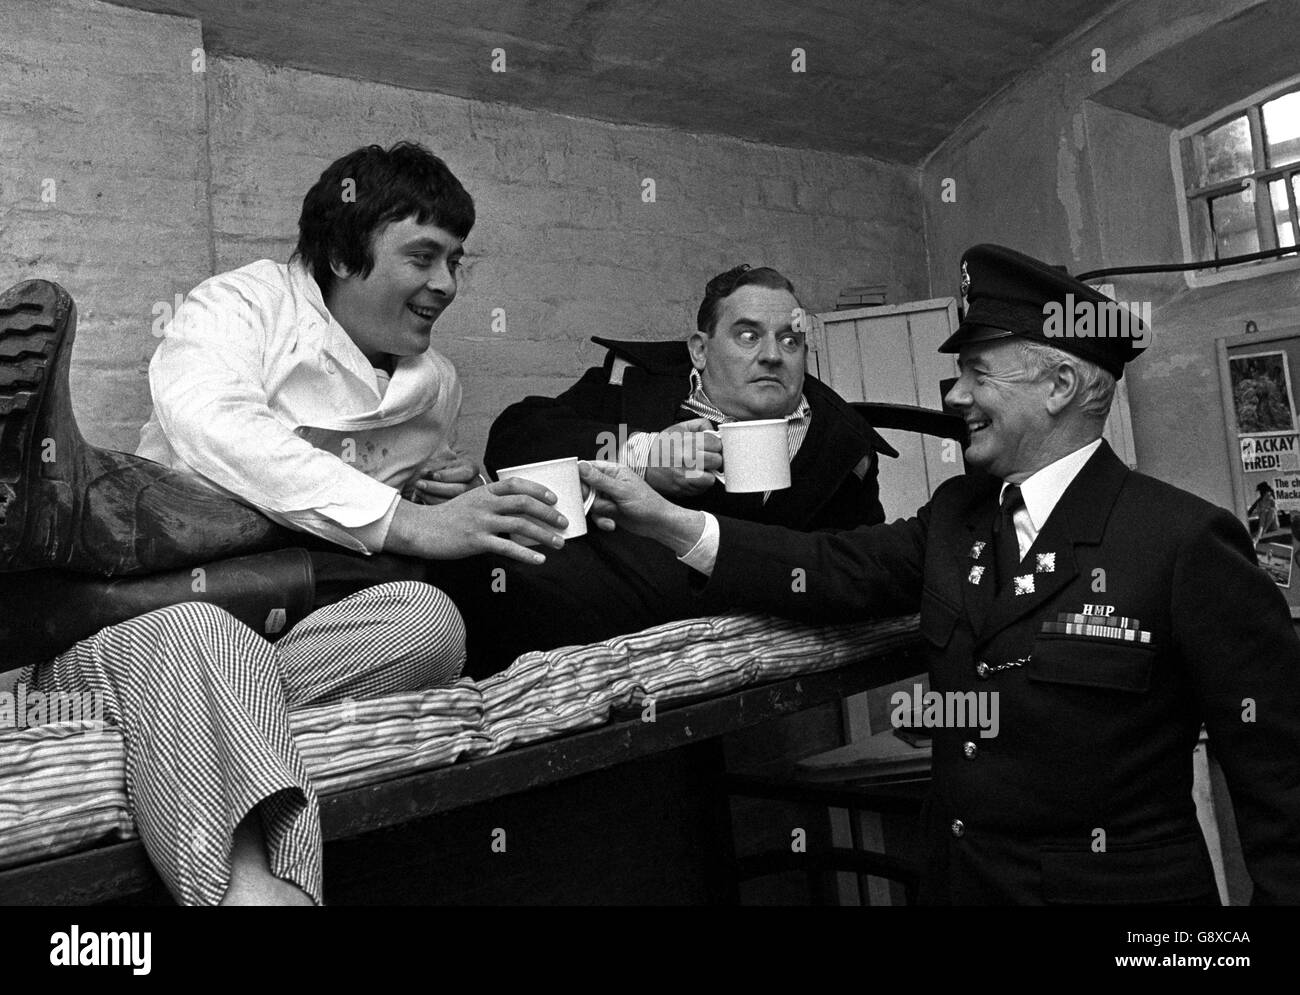 Habitual prisoner Norman Stanley Fletcher, alias actor Ronnie Barker (centre), is highly suspicious of the motives of a prison officer portrayed by actor Fulton Mackay, offering a mug of tea to cell-mate Richard Beckinsale at Chelmsford Prison. Stock Photo